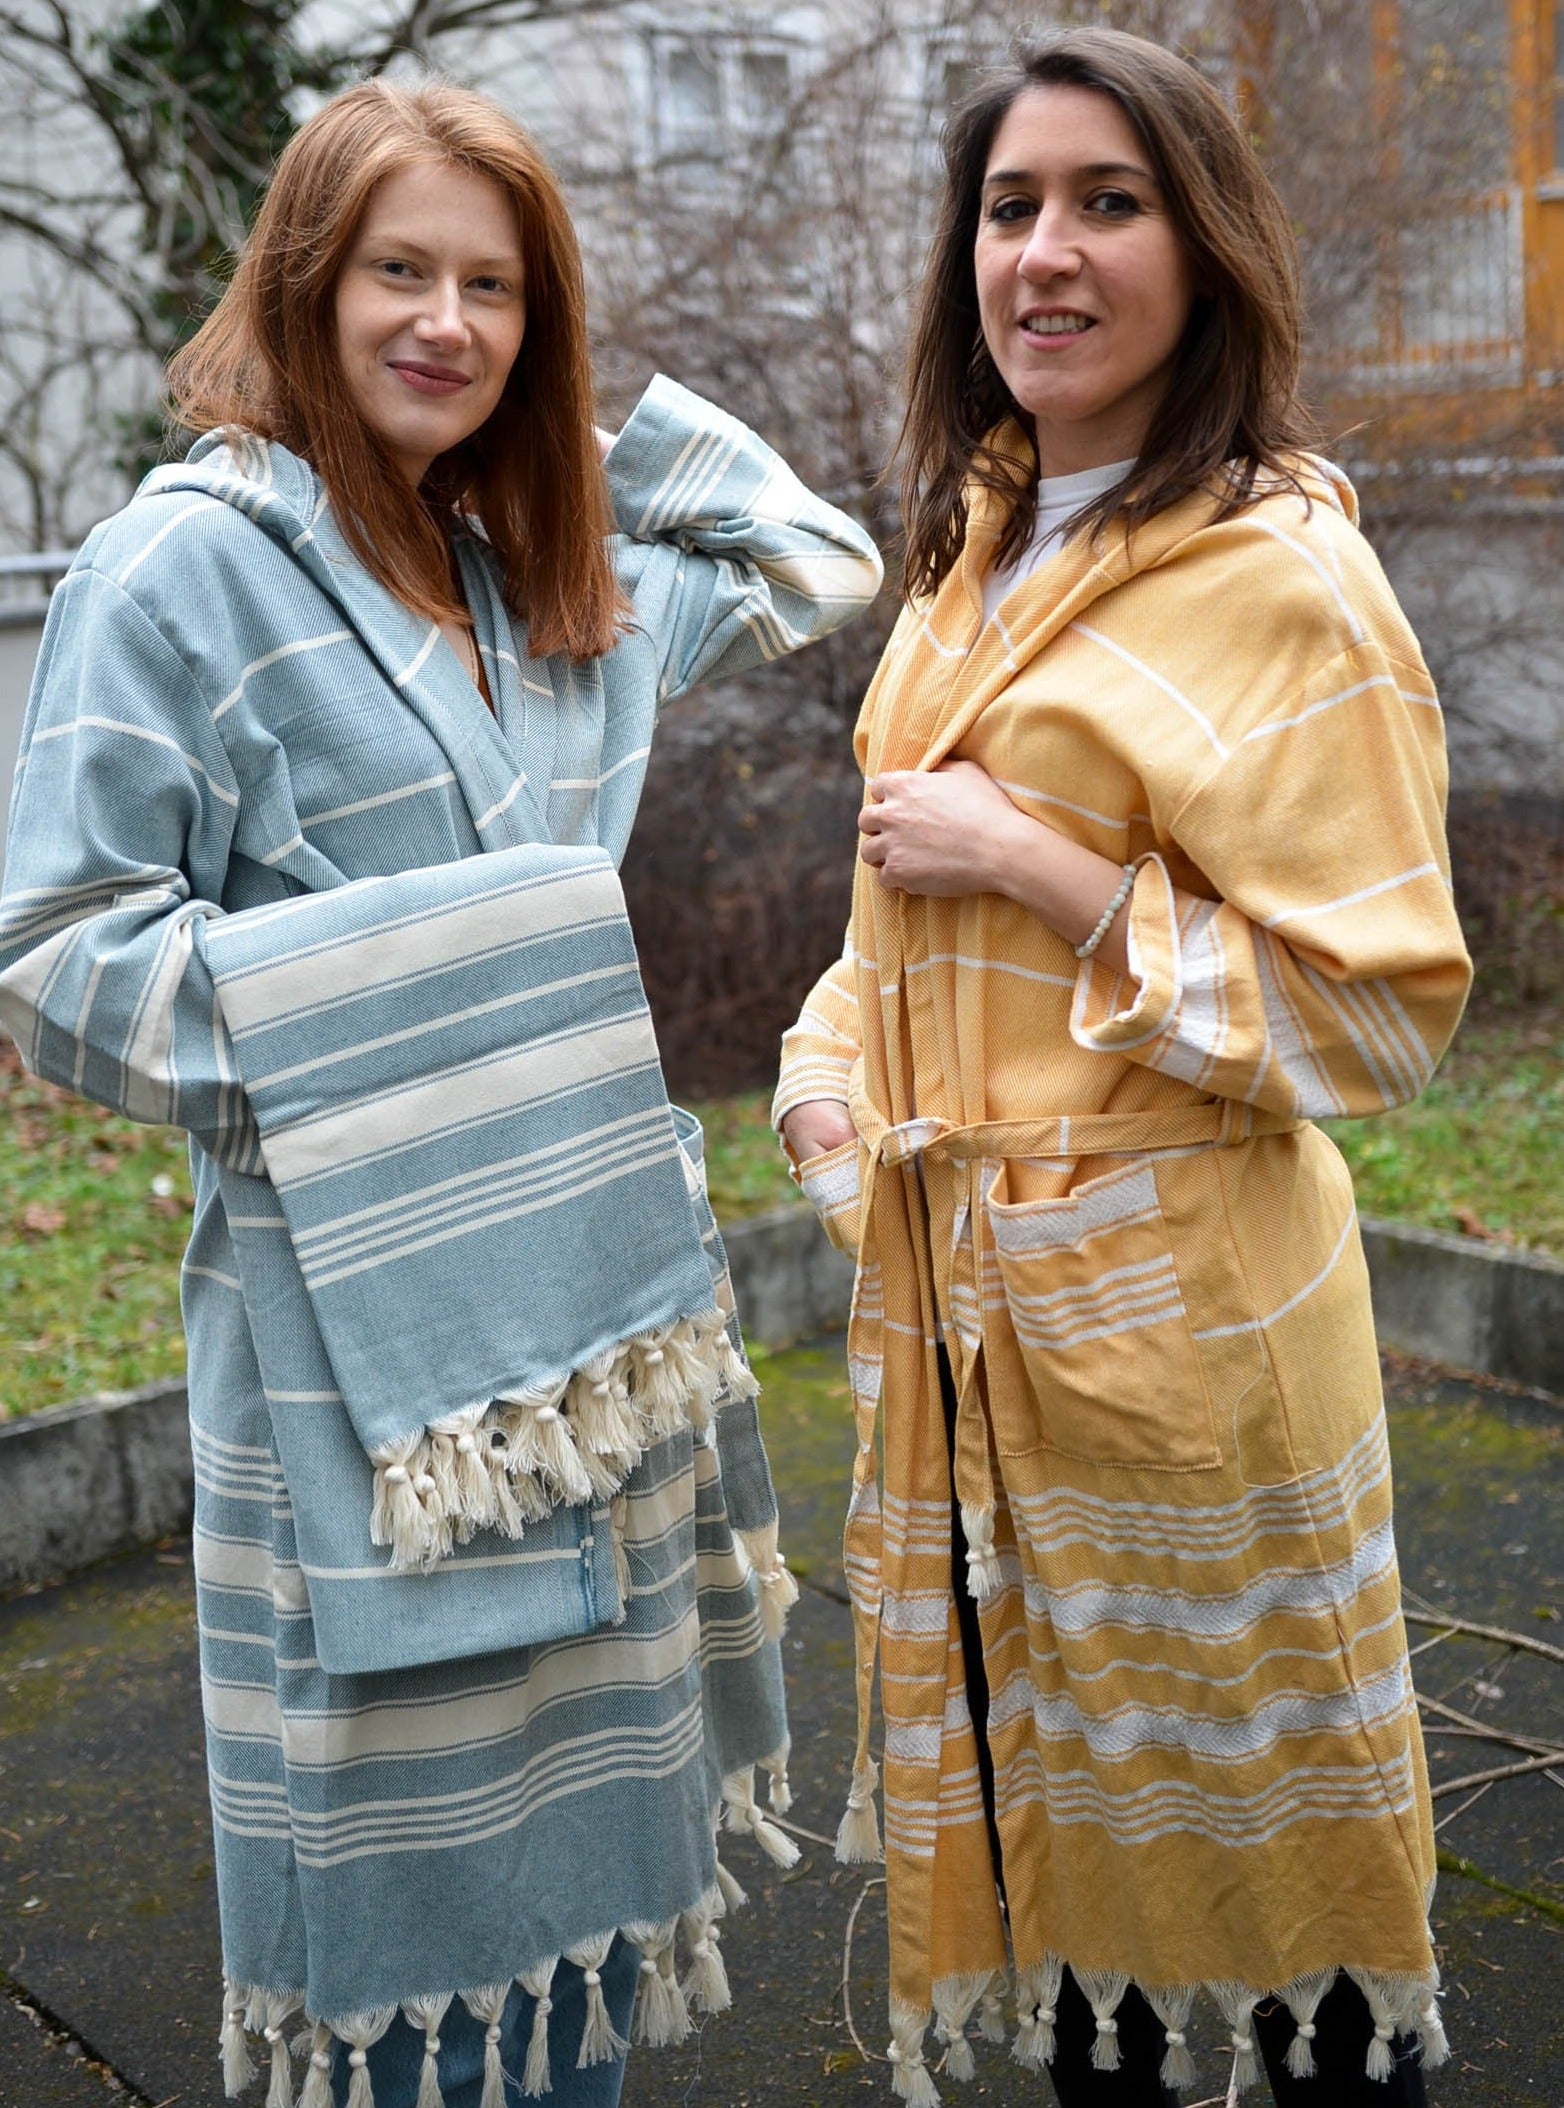 el patito towels and bathrobes traditional series 100% natural cotton robes bathrobes lightweight